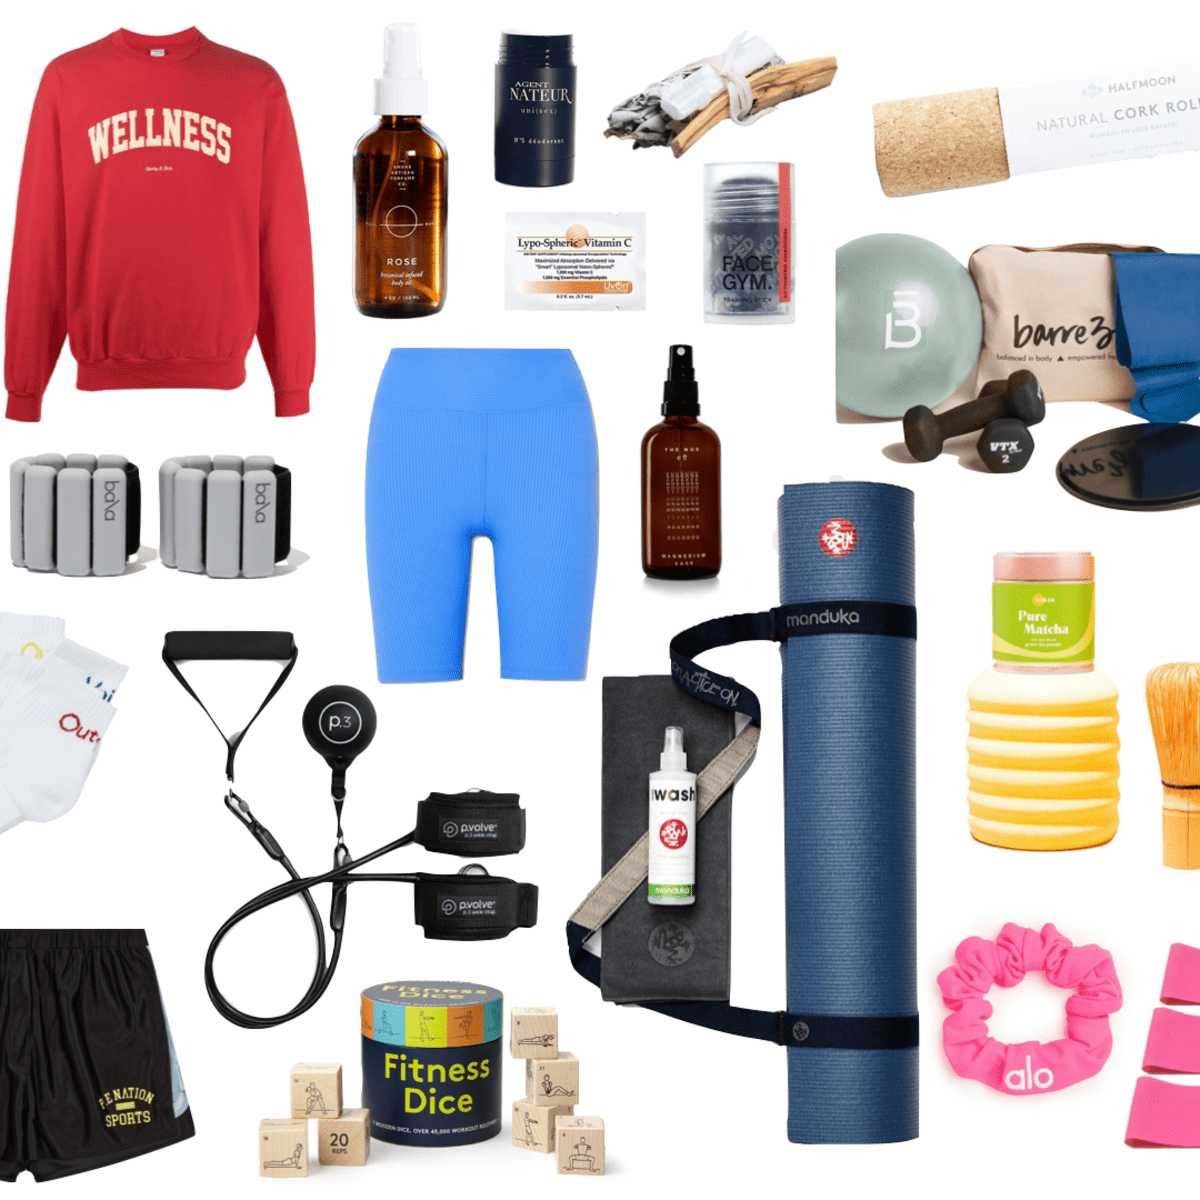 I. Introduction to Gifts for Fitness and Wellness Enthusiasts